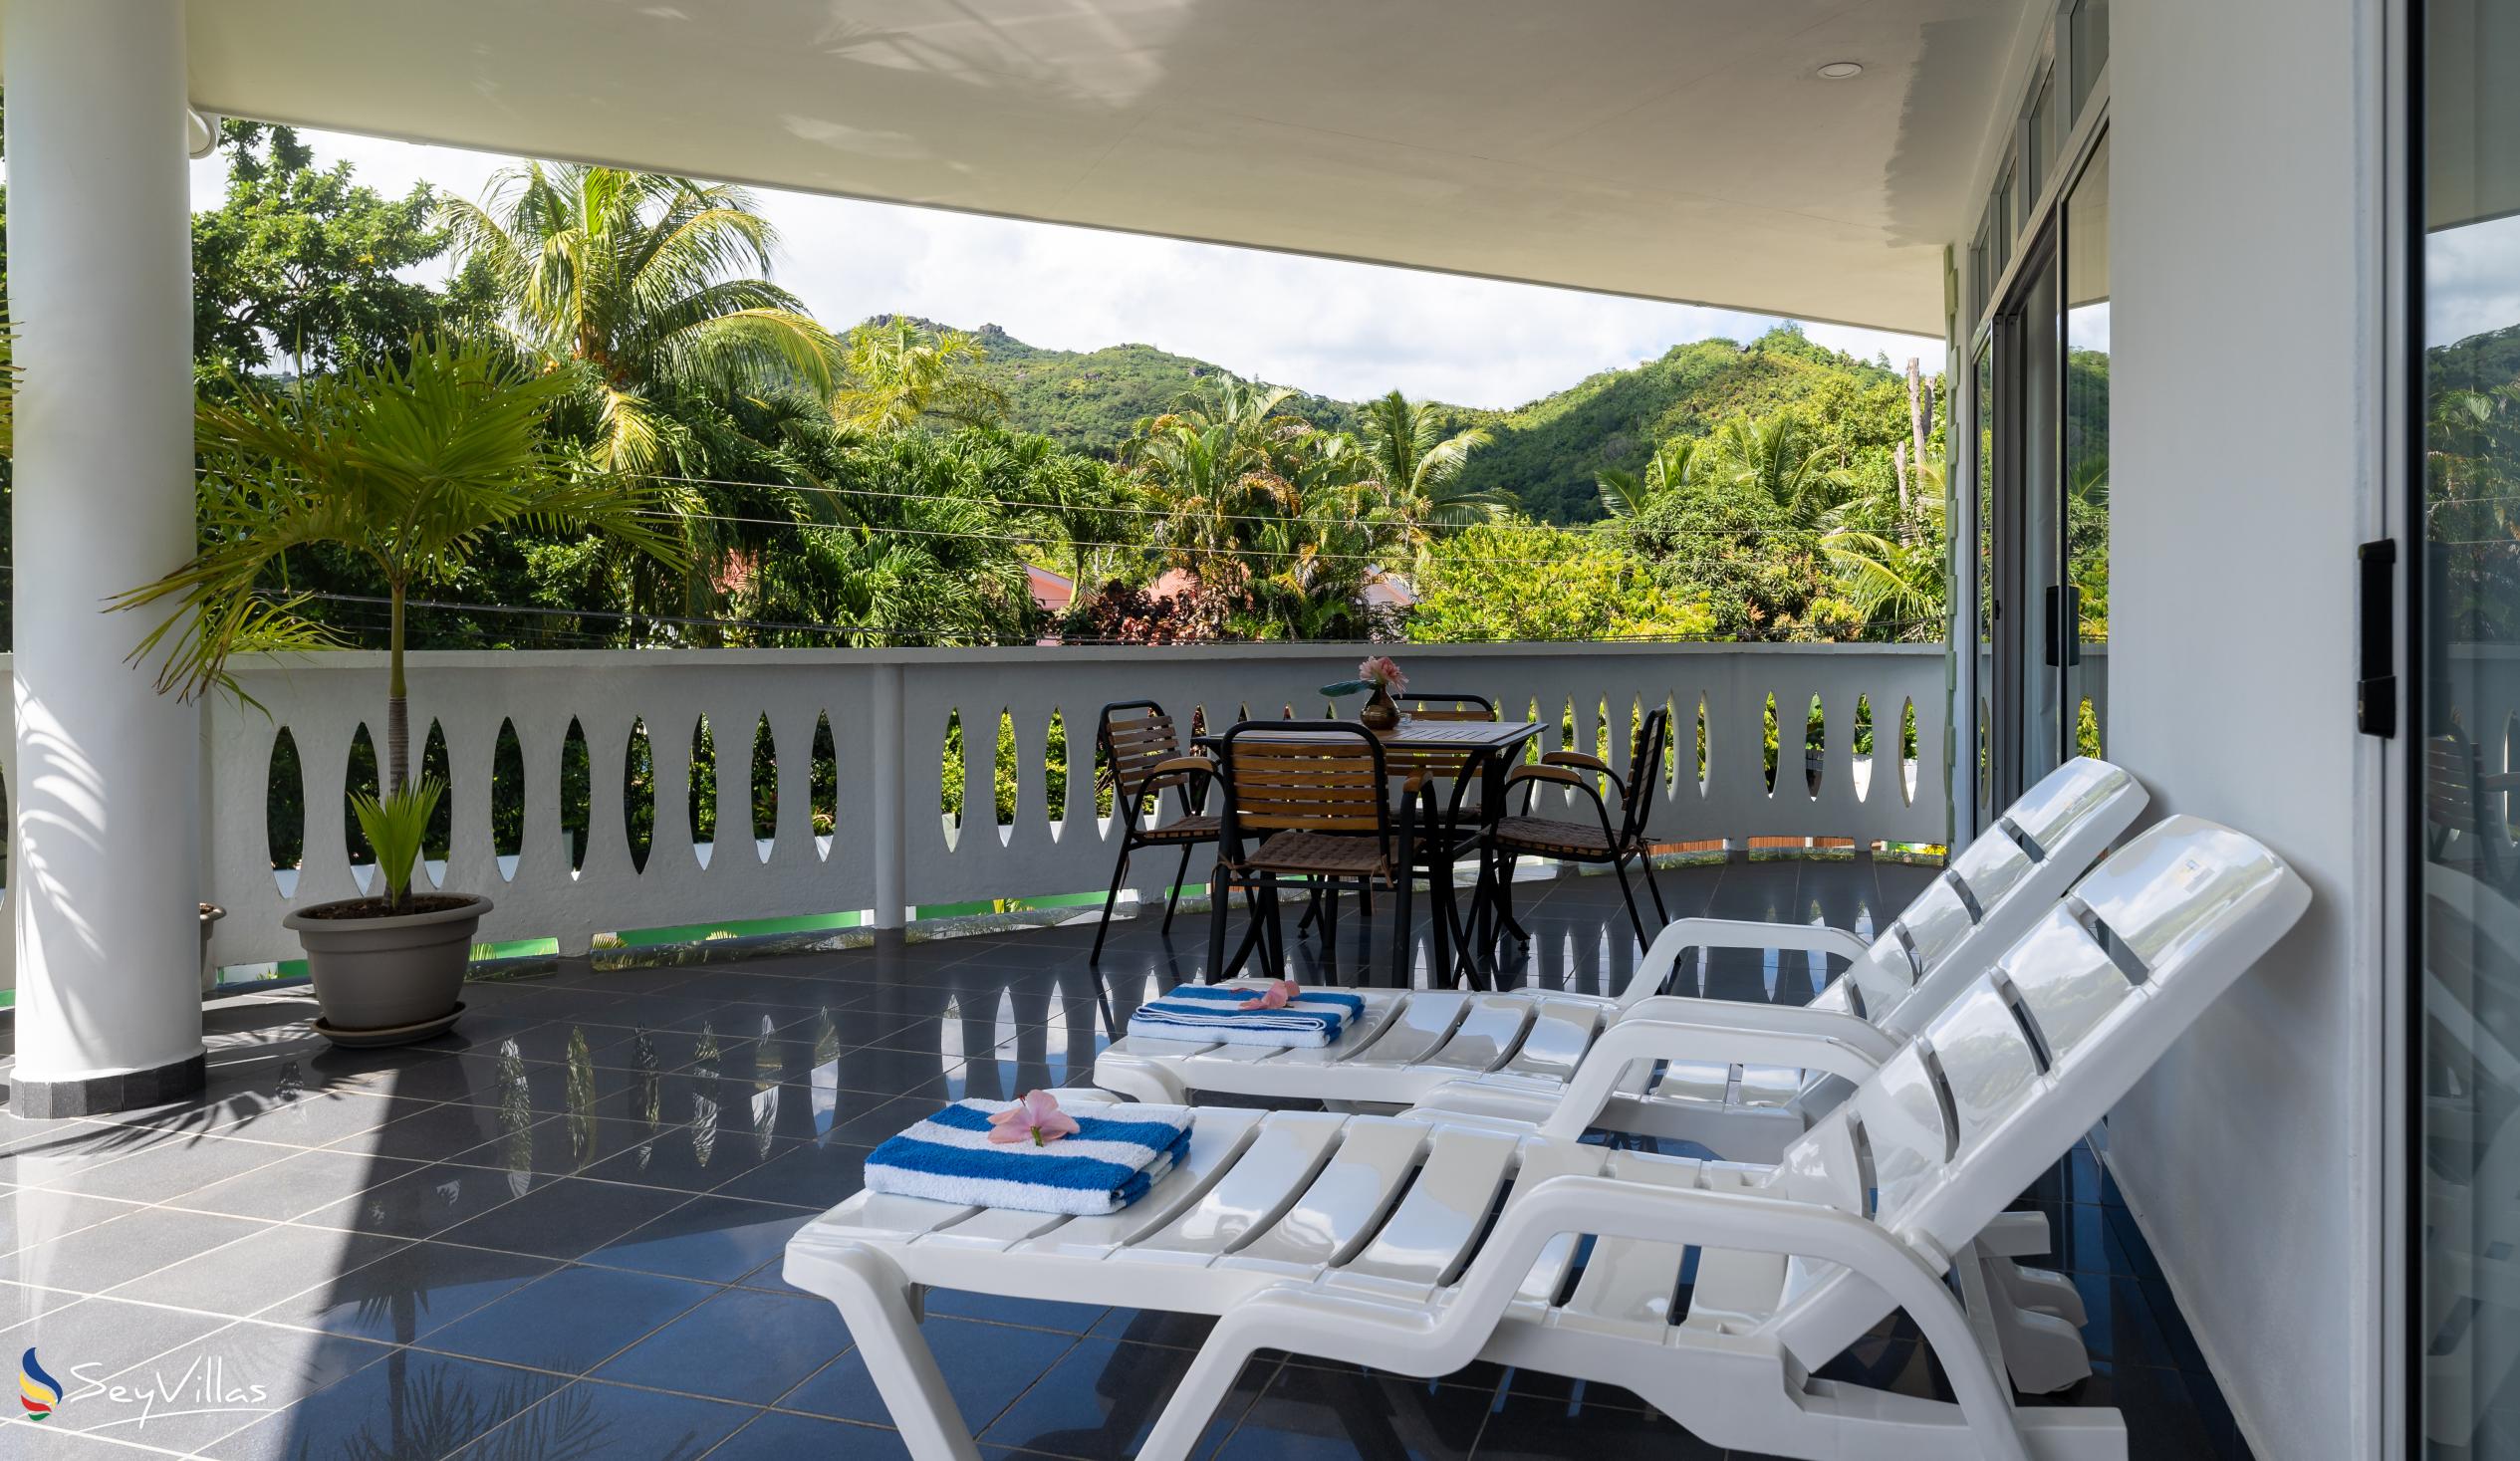 Photo 64: 340 Degrees Mountain View Apartments - Apartment with Mountain View - 1 Bedroom - Mahé (Seychelles)